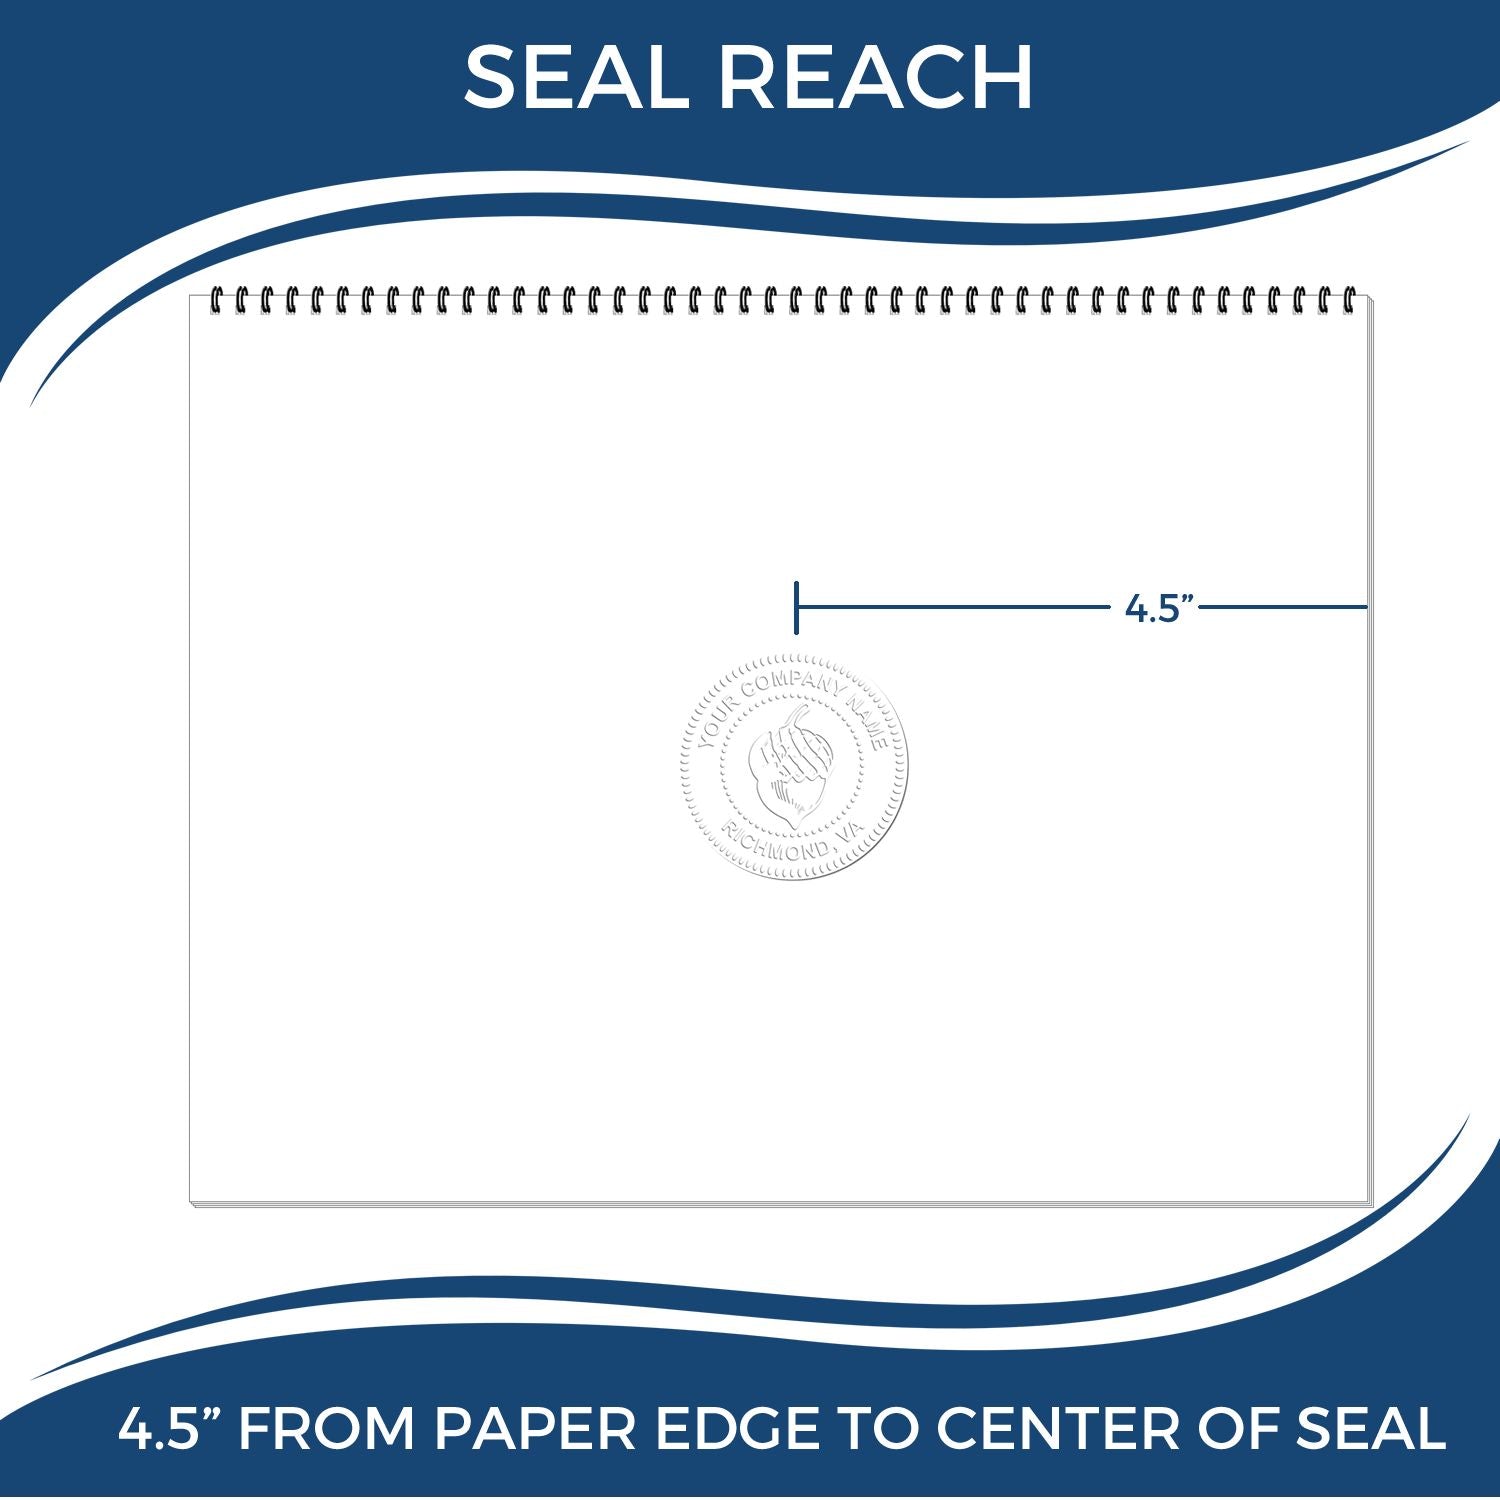 An infographic showing the seal reach which is represented by a ruler and a miniature seal image of the State of Michigan Extended Long Reach Geologist Seal